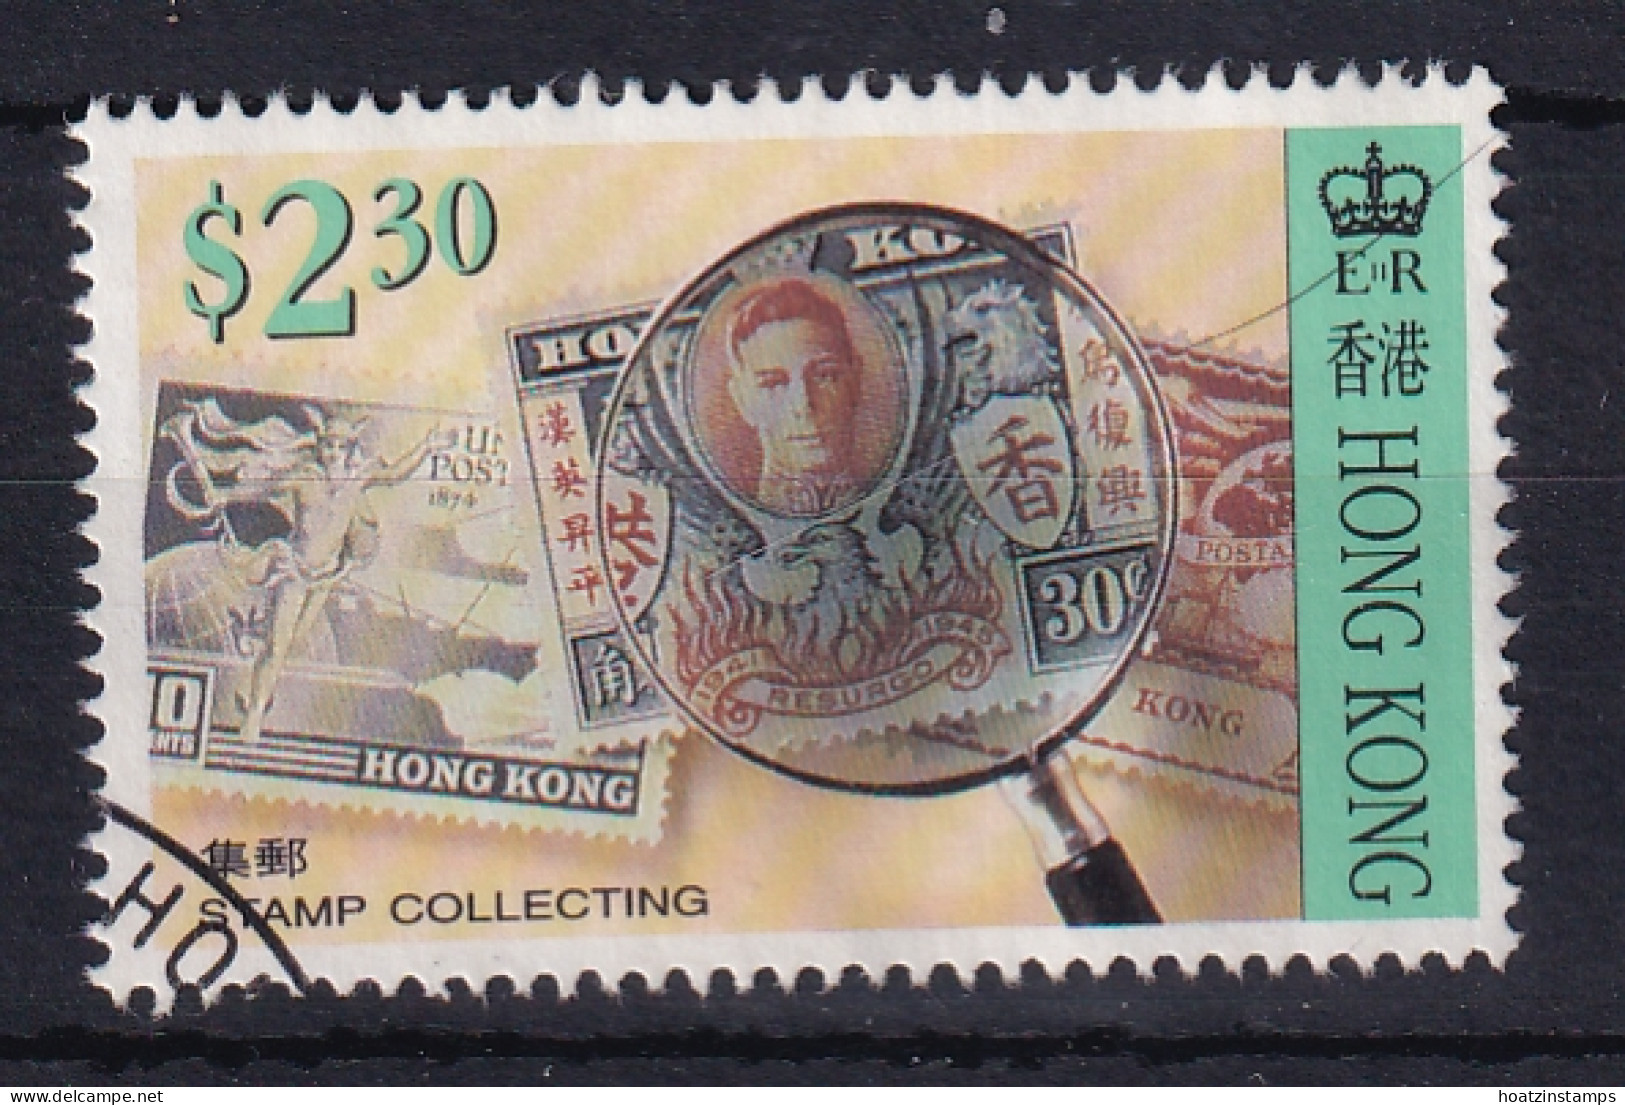 Hong Kong: 1992   Stamp Collecting   SG720    $2.30   Used  - Oblitérés